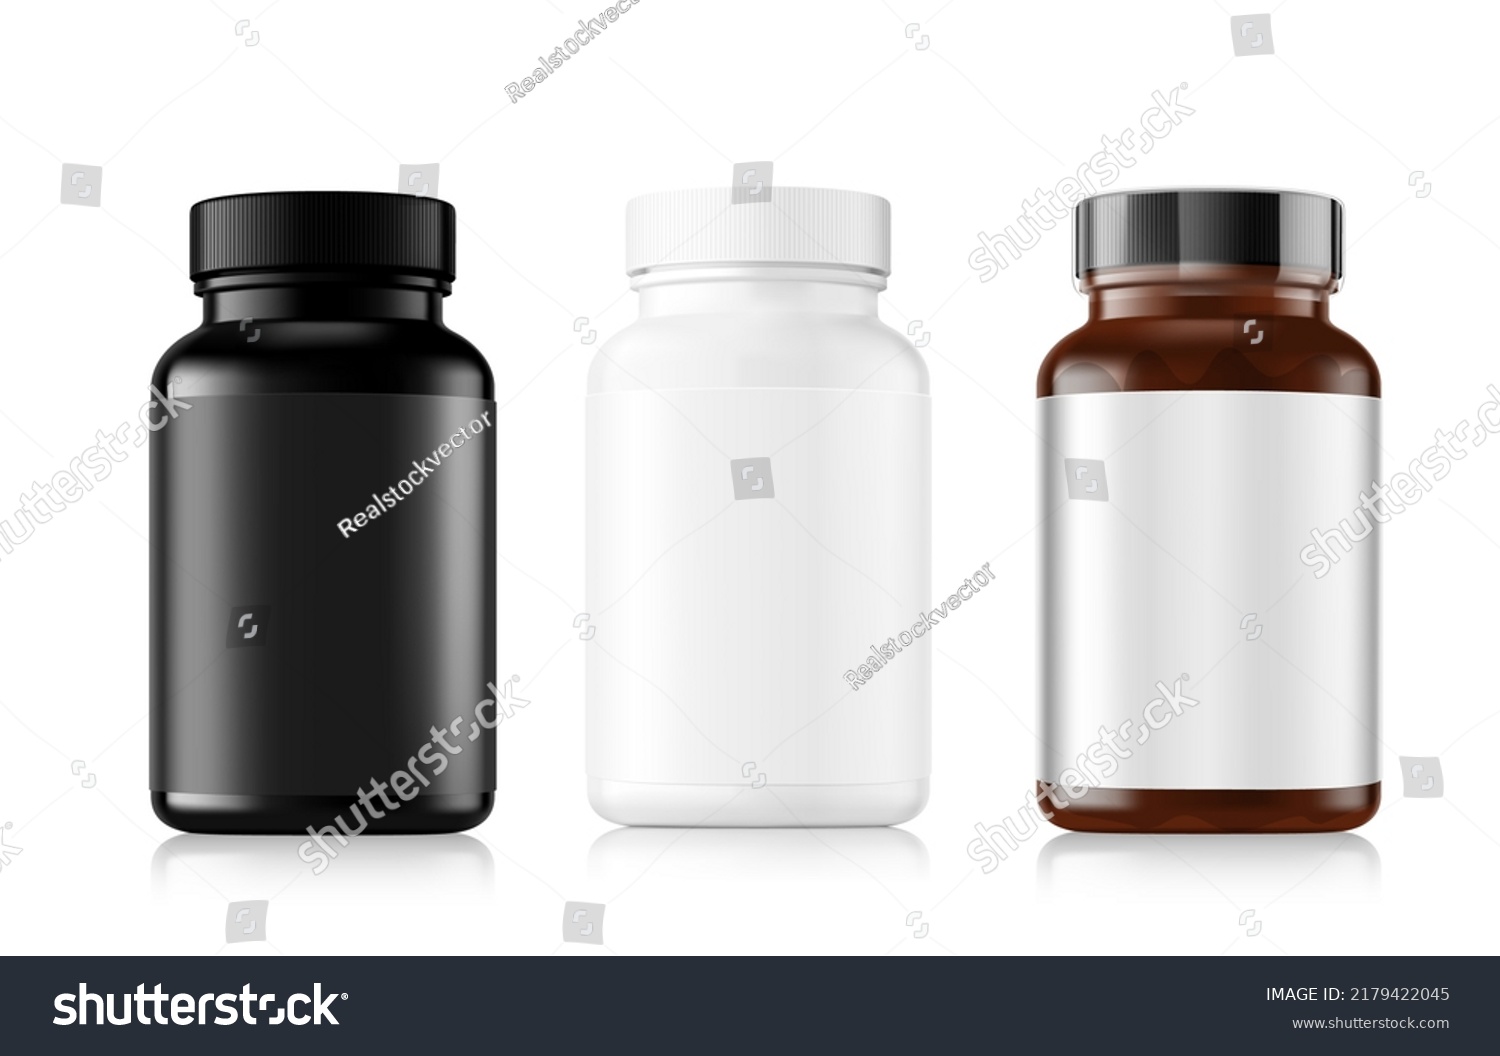 Black, white and amber bottles mockup isolated on white background. Can be used for medical, cosmetic, food. Vector illustration. EPS10.	 #2179422045